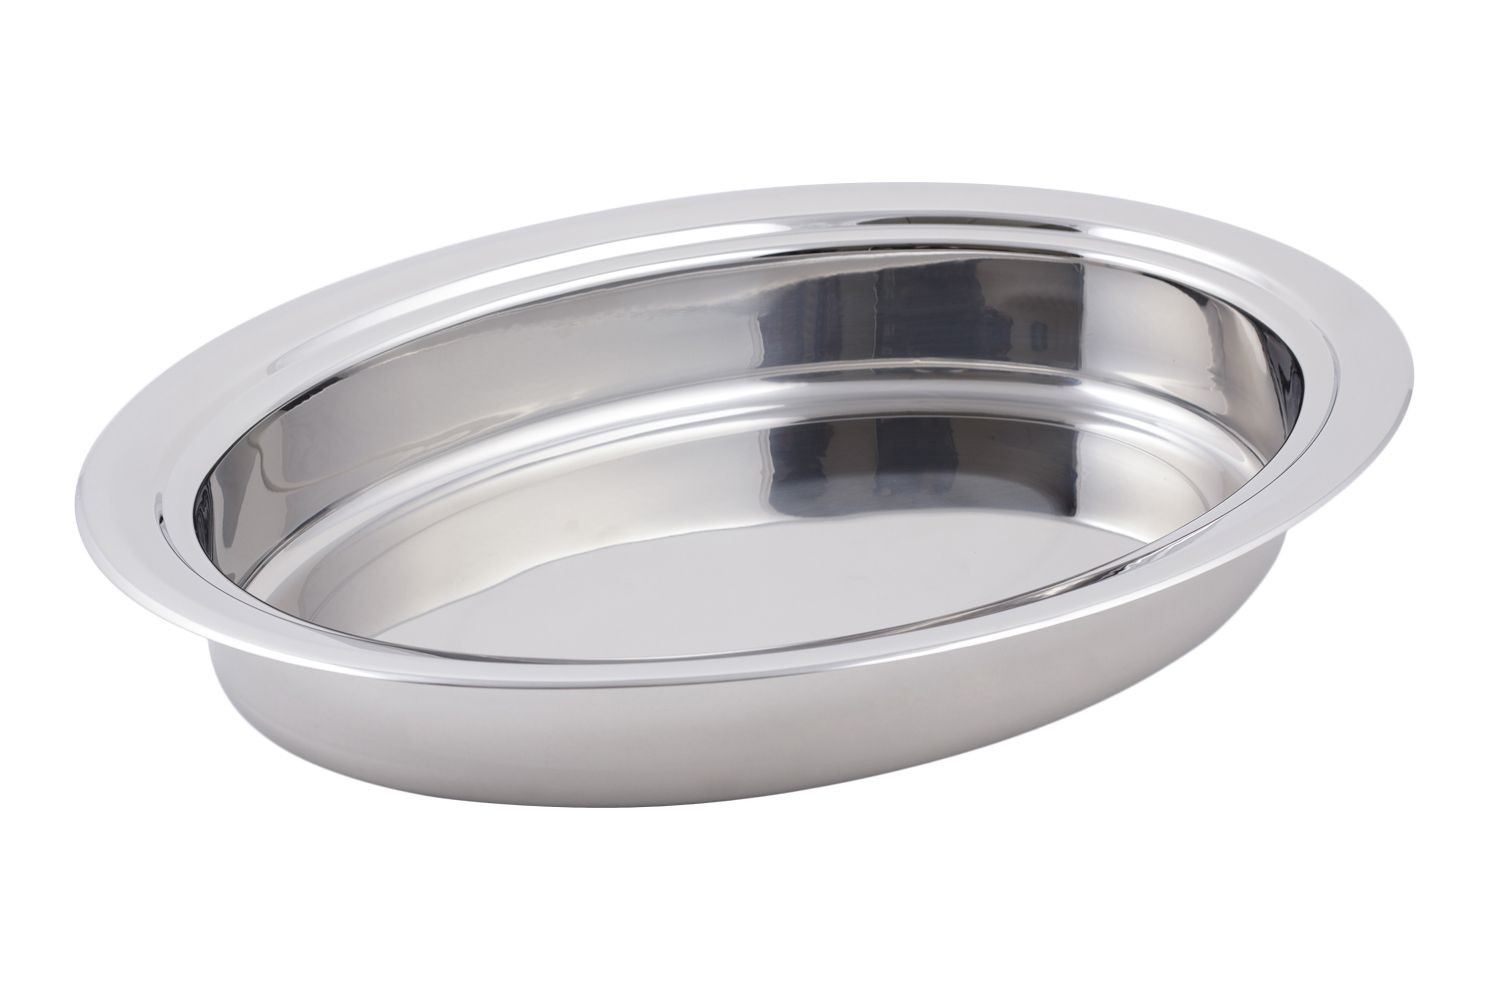 Bon Chef 20201 Stackable Oval Food Pan, 20 1/2" x 15 3/8" x 3 1/8" H.